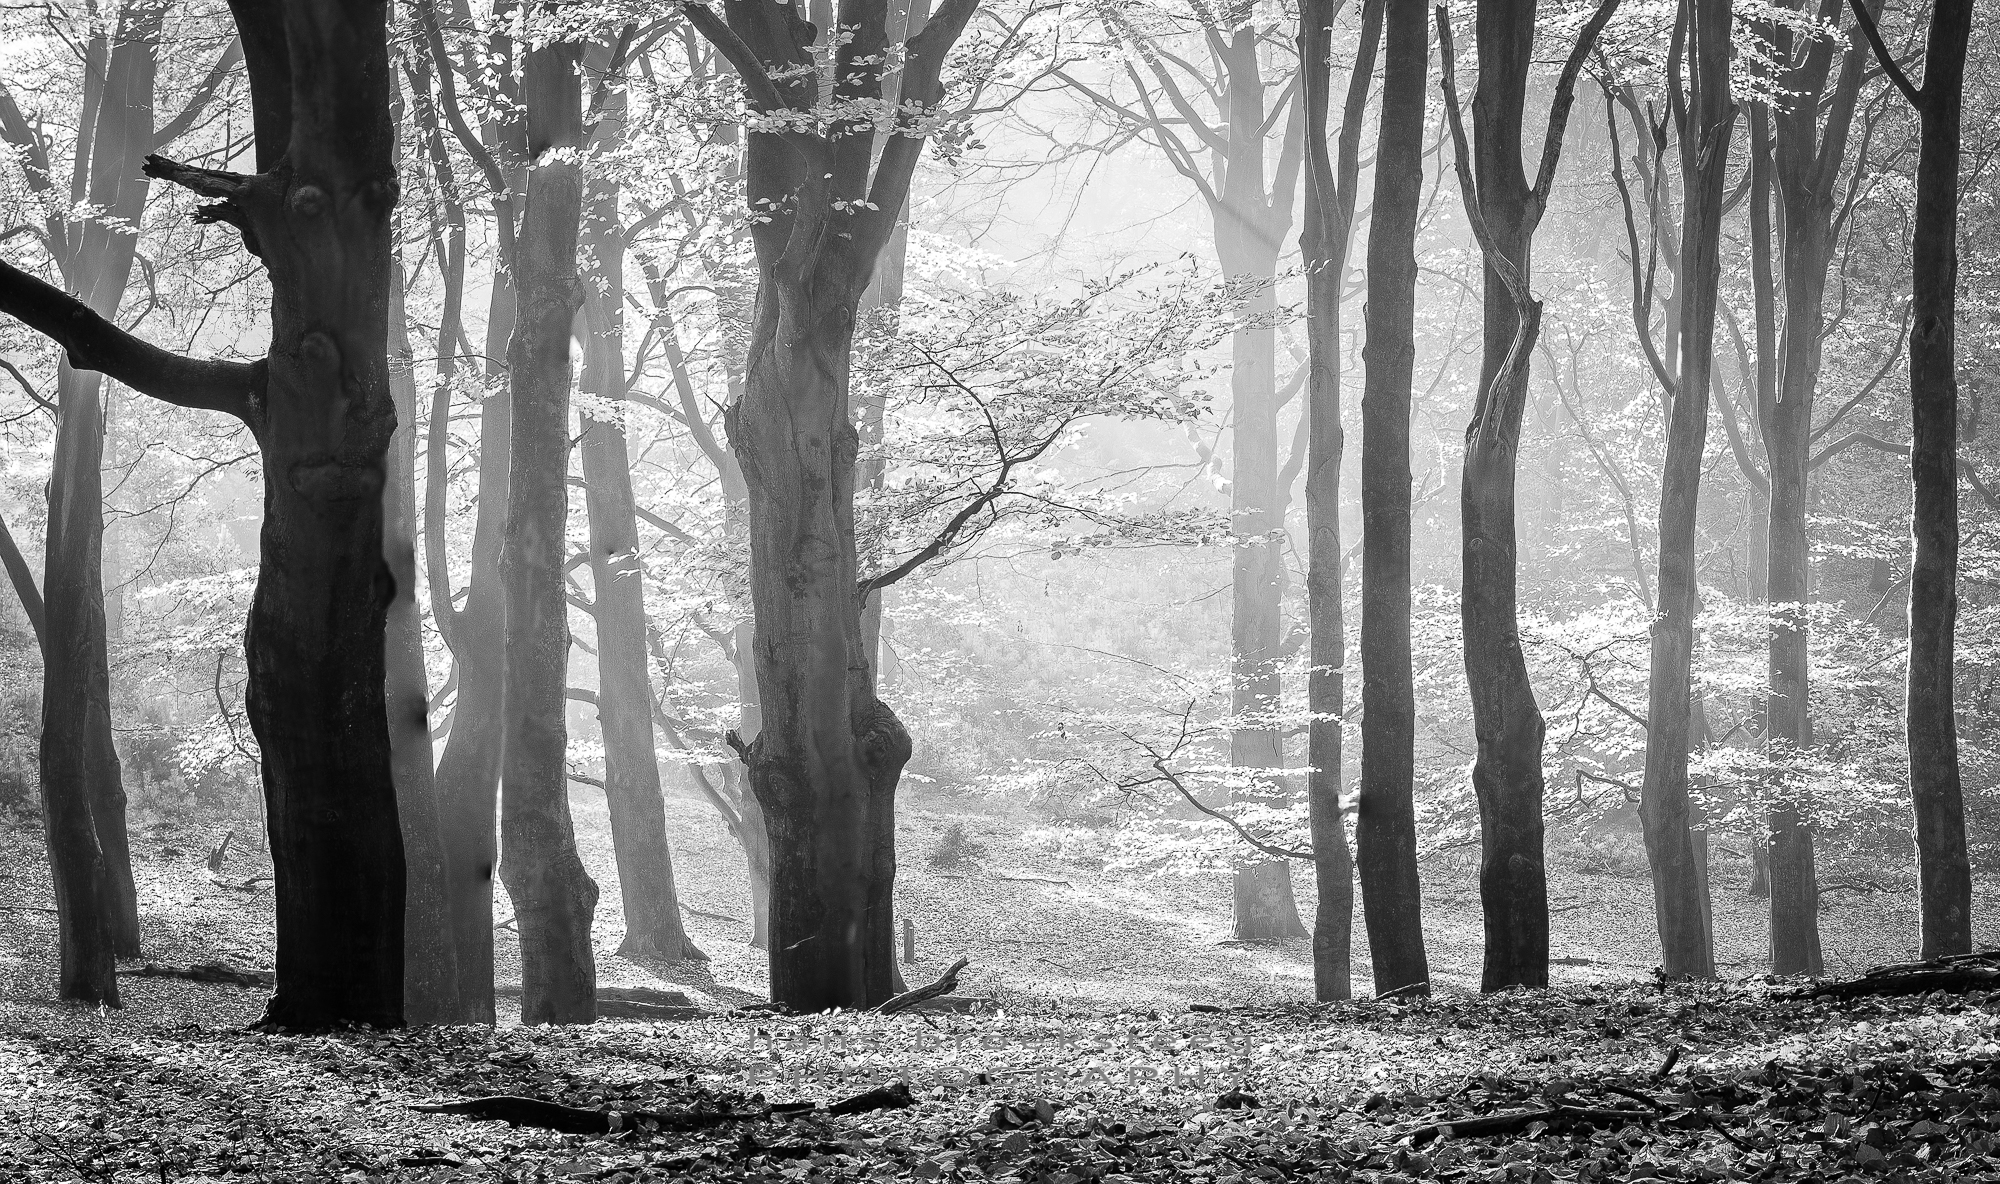 Backlit trees in black and white